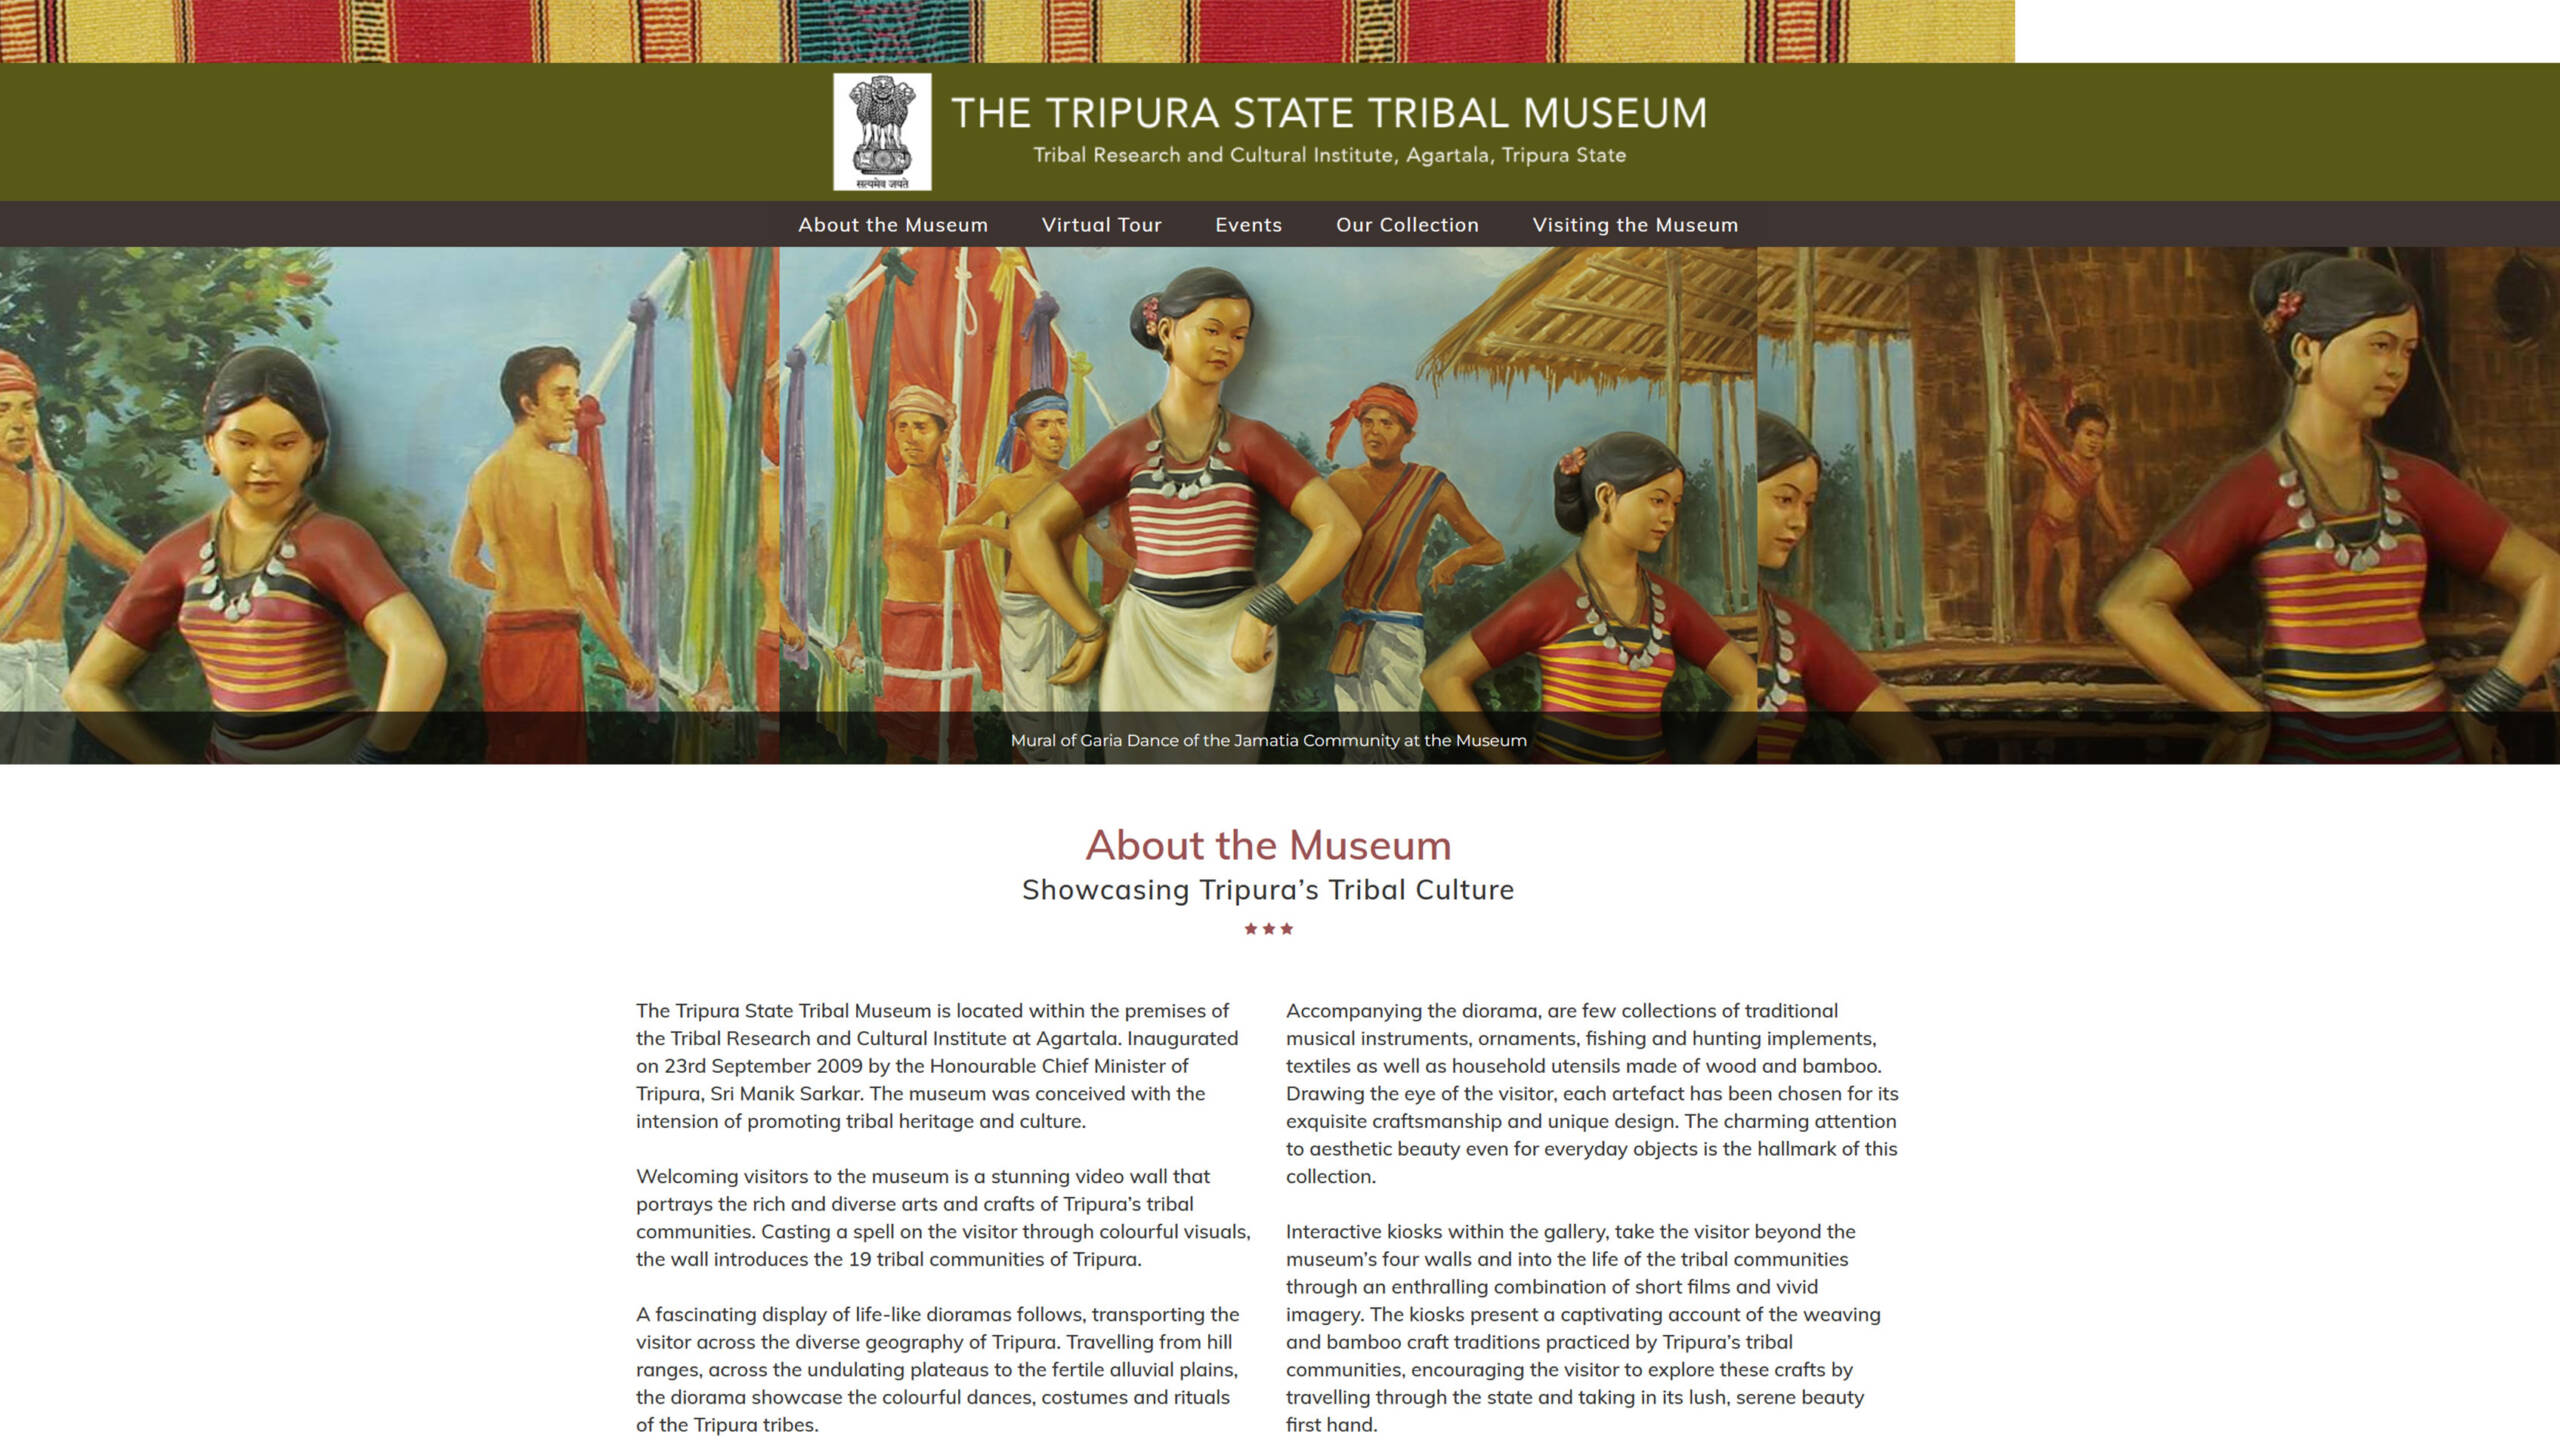 Home page of the website of The Tripura State Tribal Museum